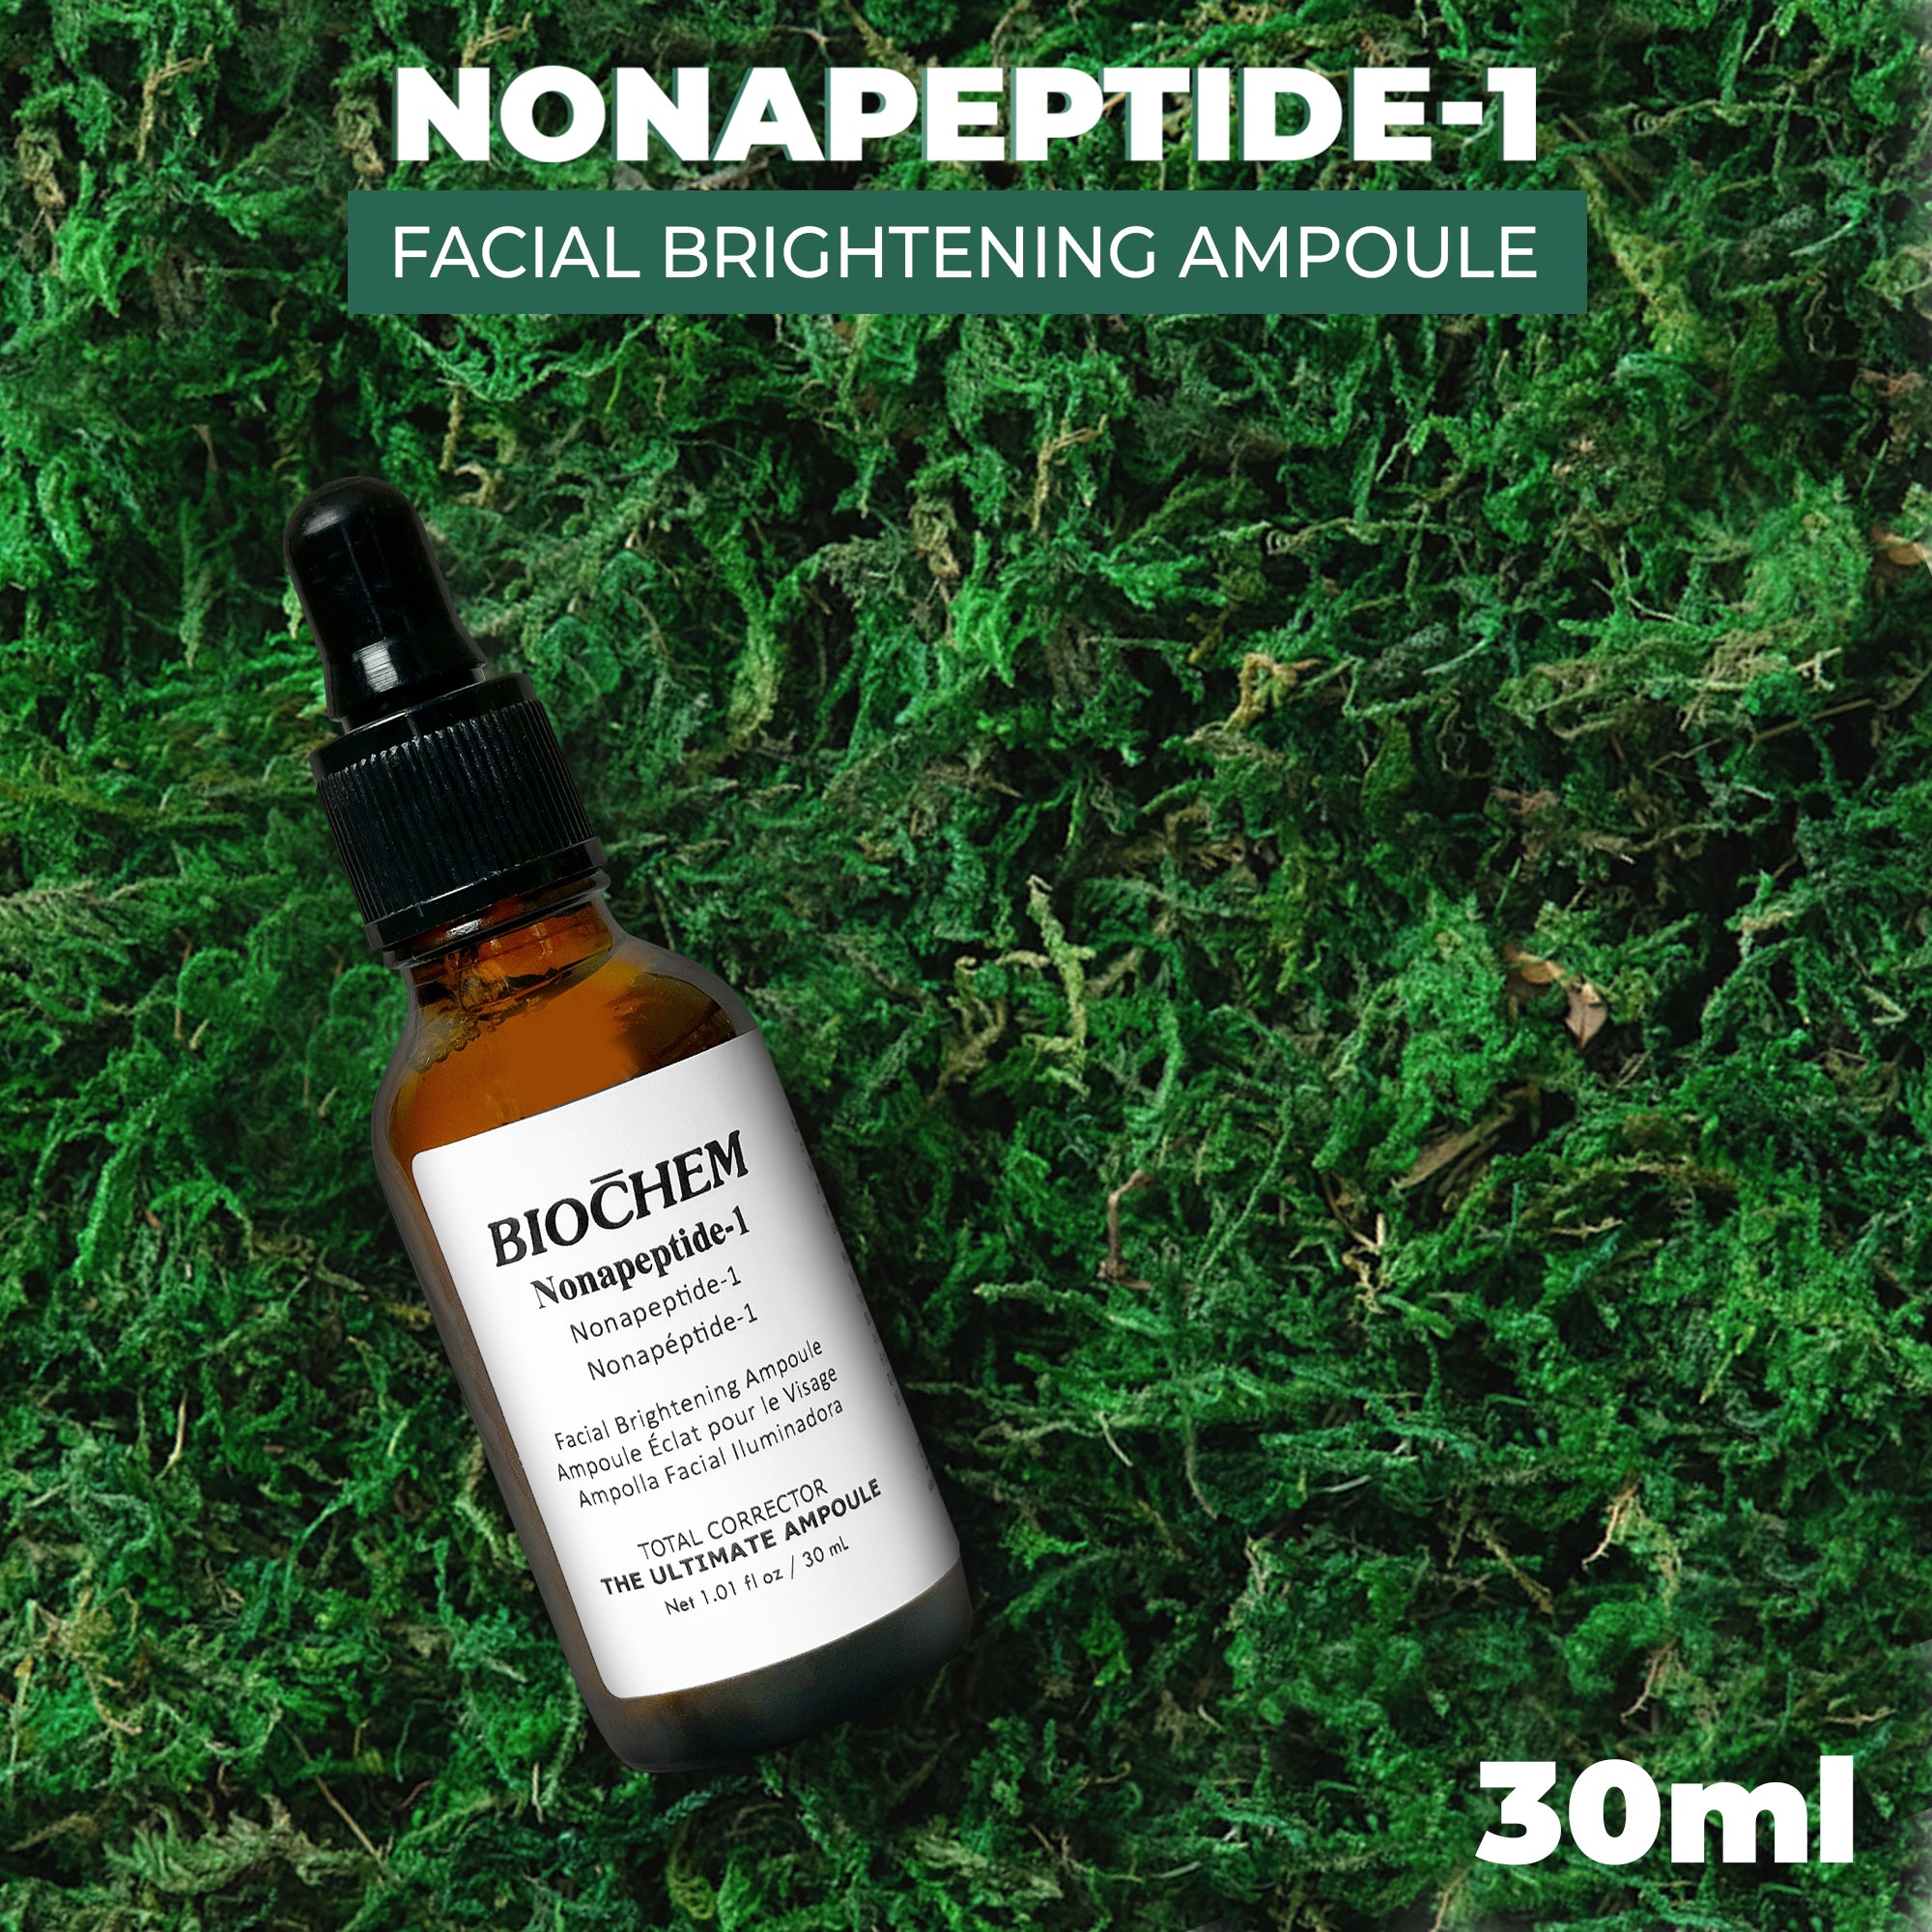 How Nonapeptide-1 Revitalizes Your Skin in 7 Days